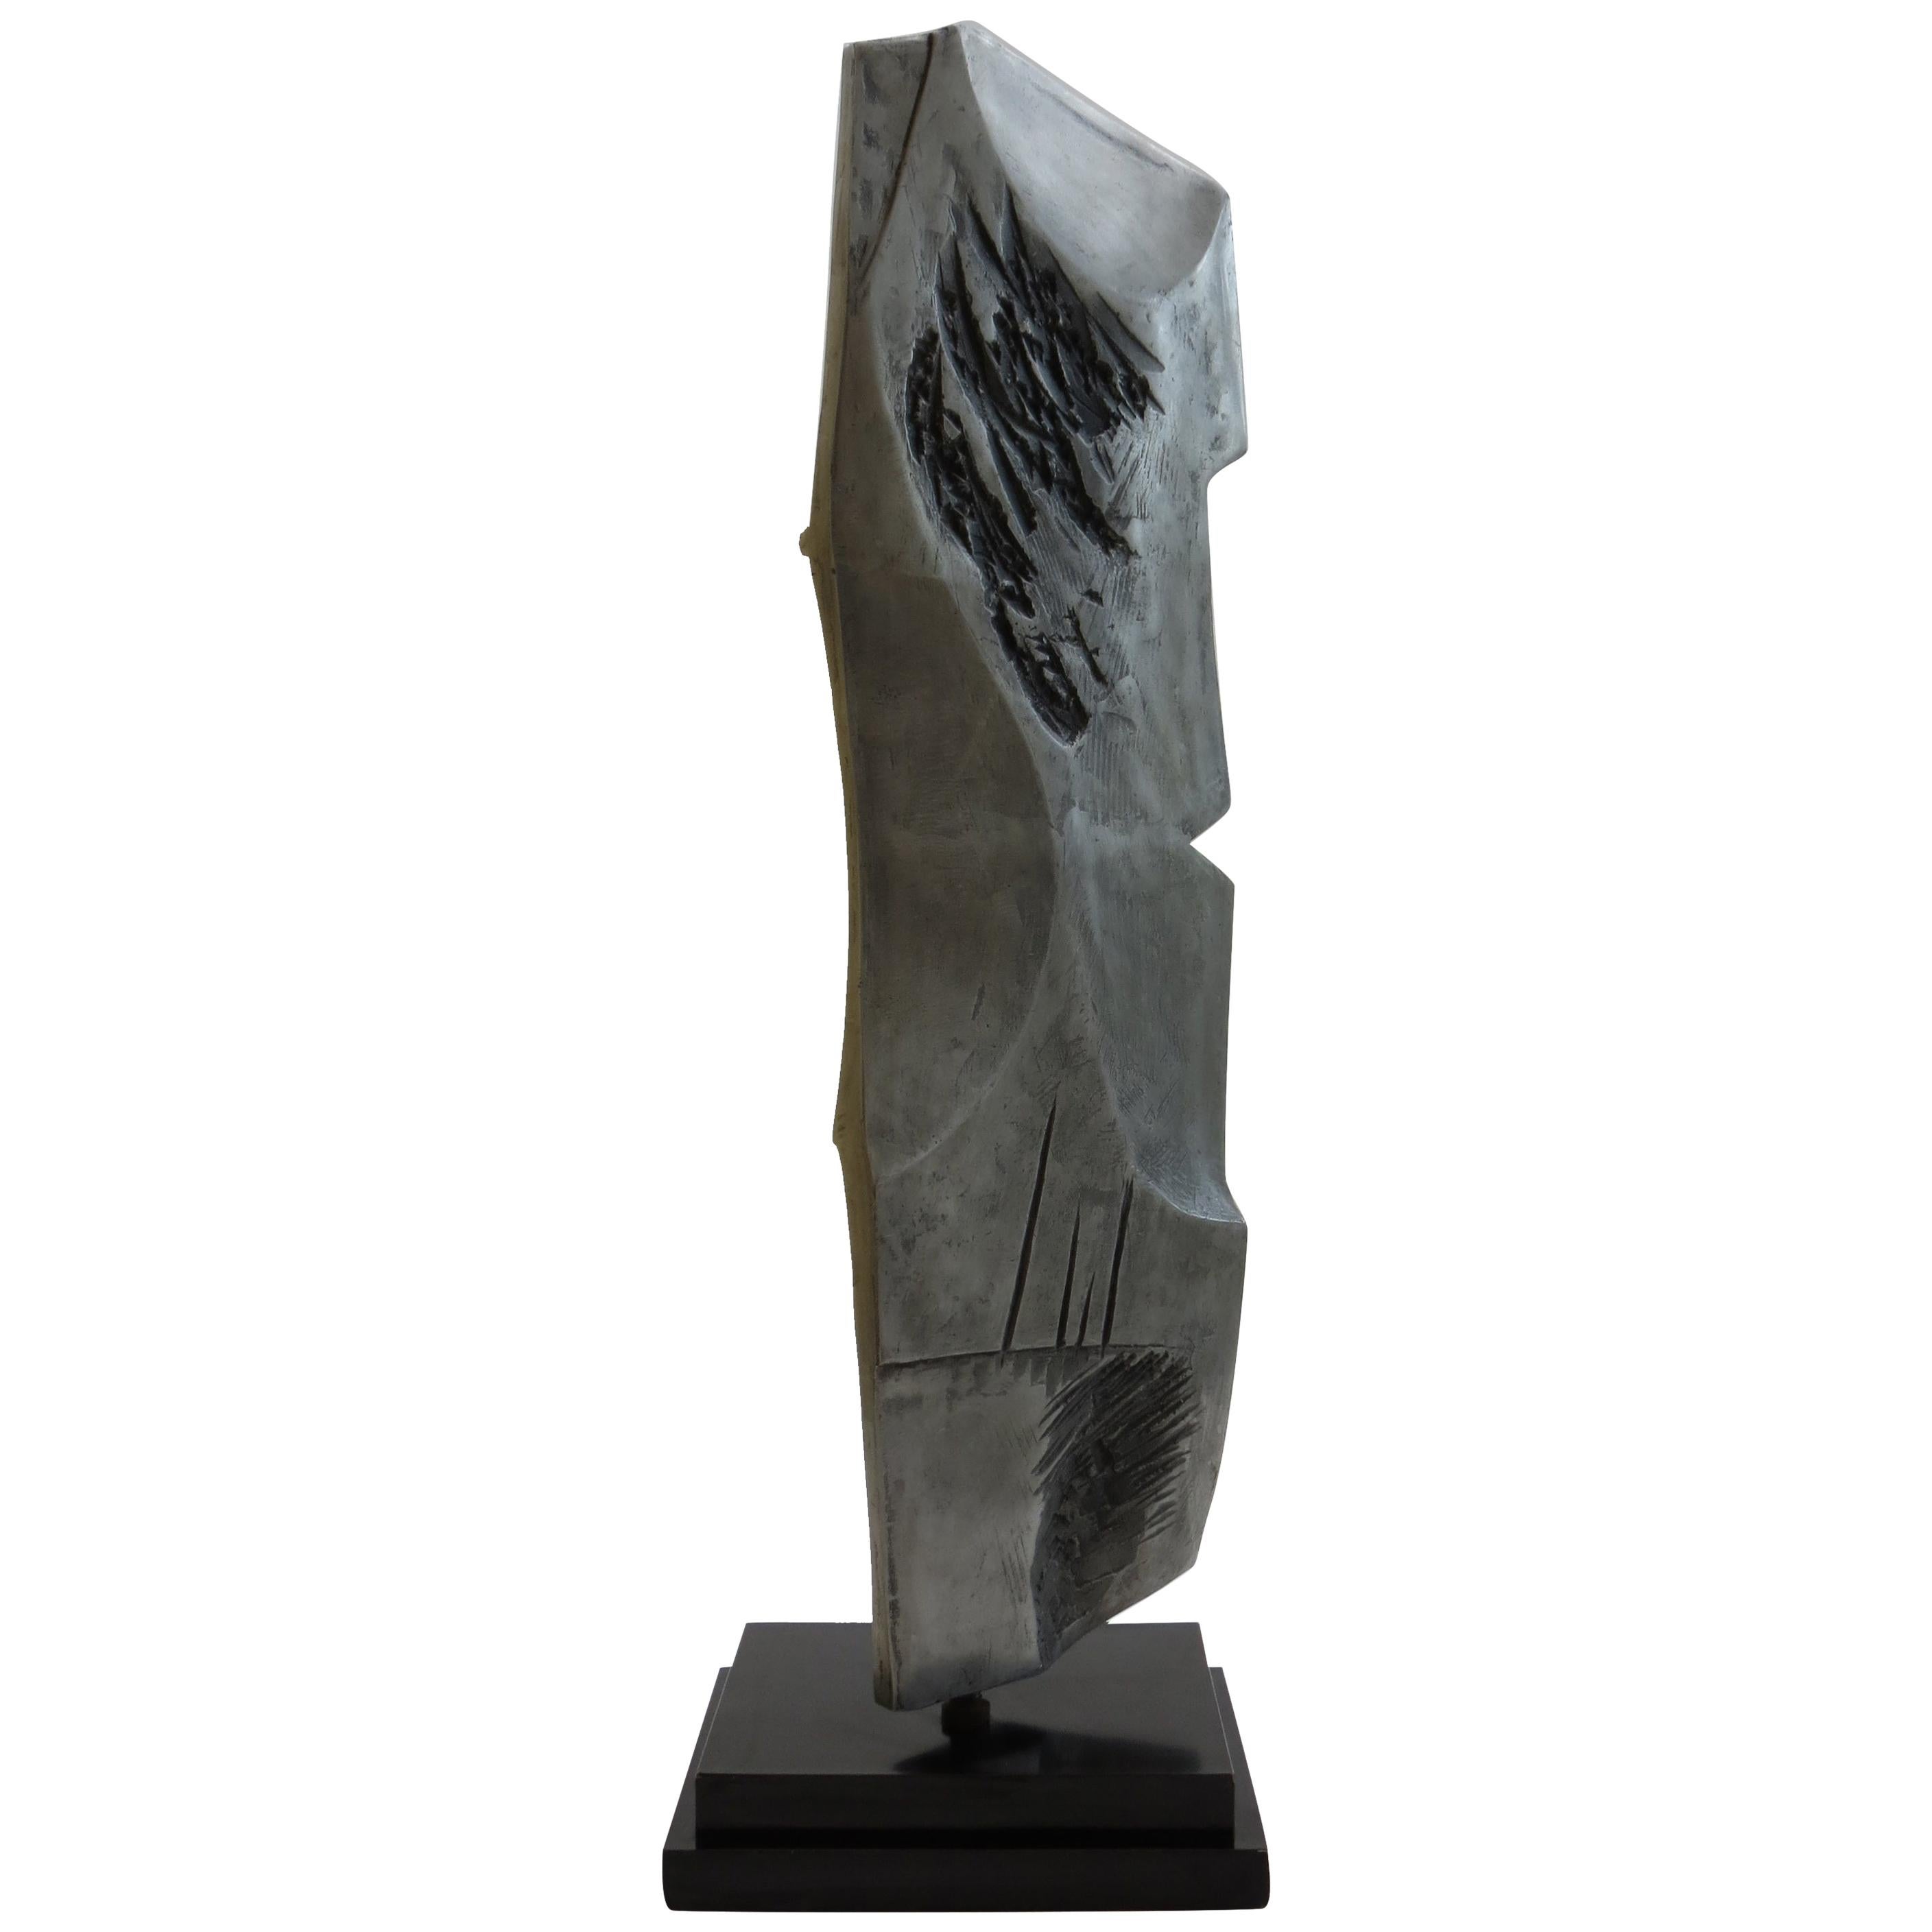 A very impressive floor standing abstract sculpture titled Blade I, circa 1970s.

Made from cast aluminium with laminate base. With a textured and smooth finish to both sides. The ‘blade’ can be rotated on a steel centre pivot to adjust the